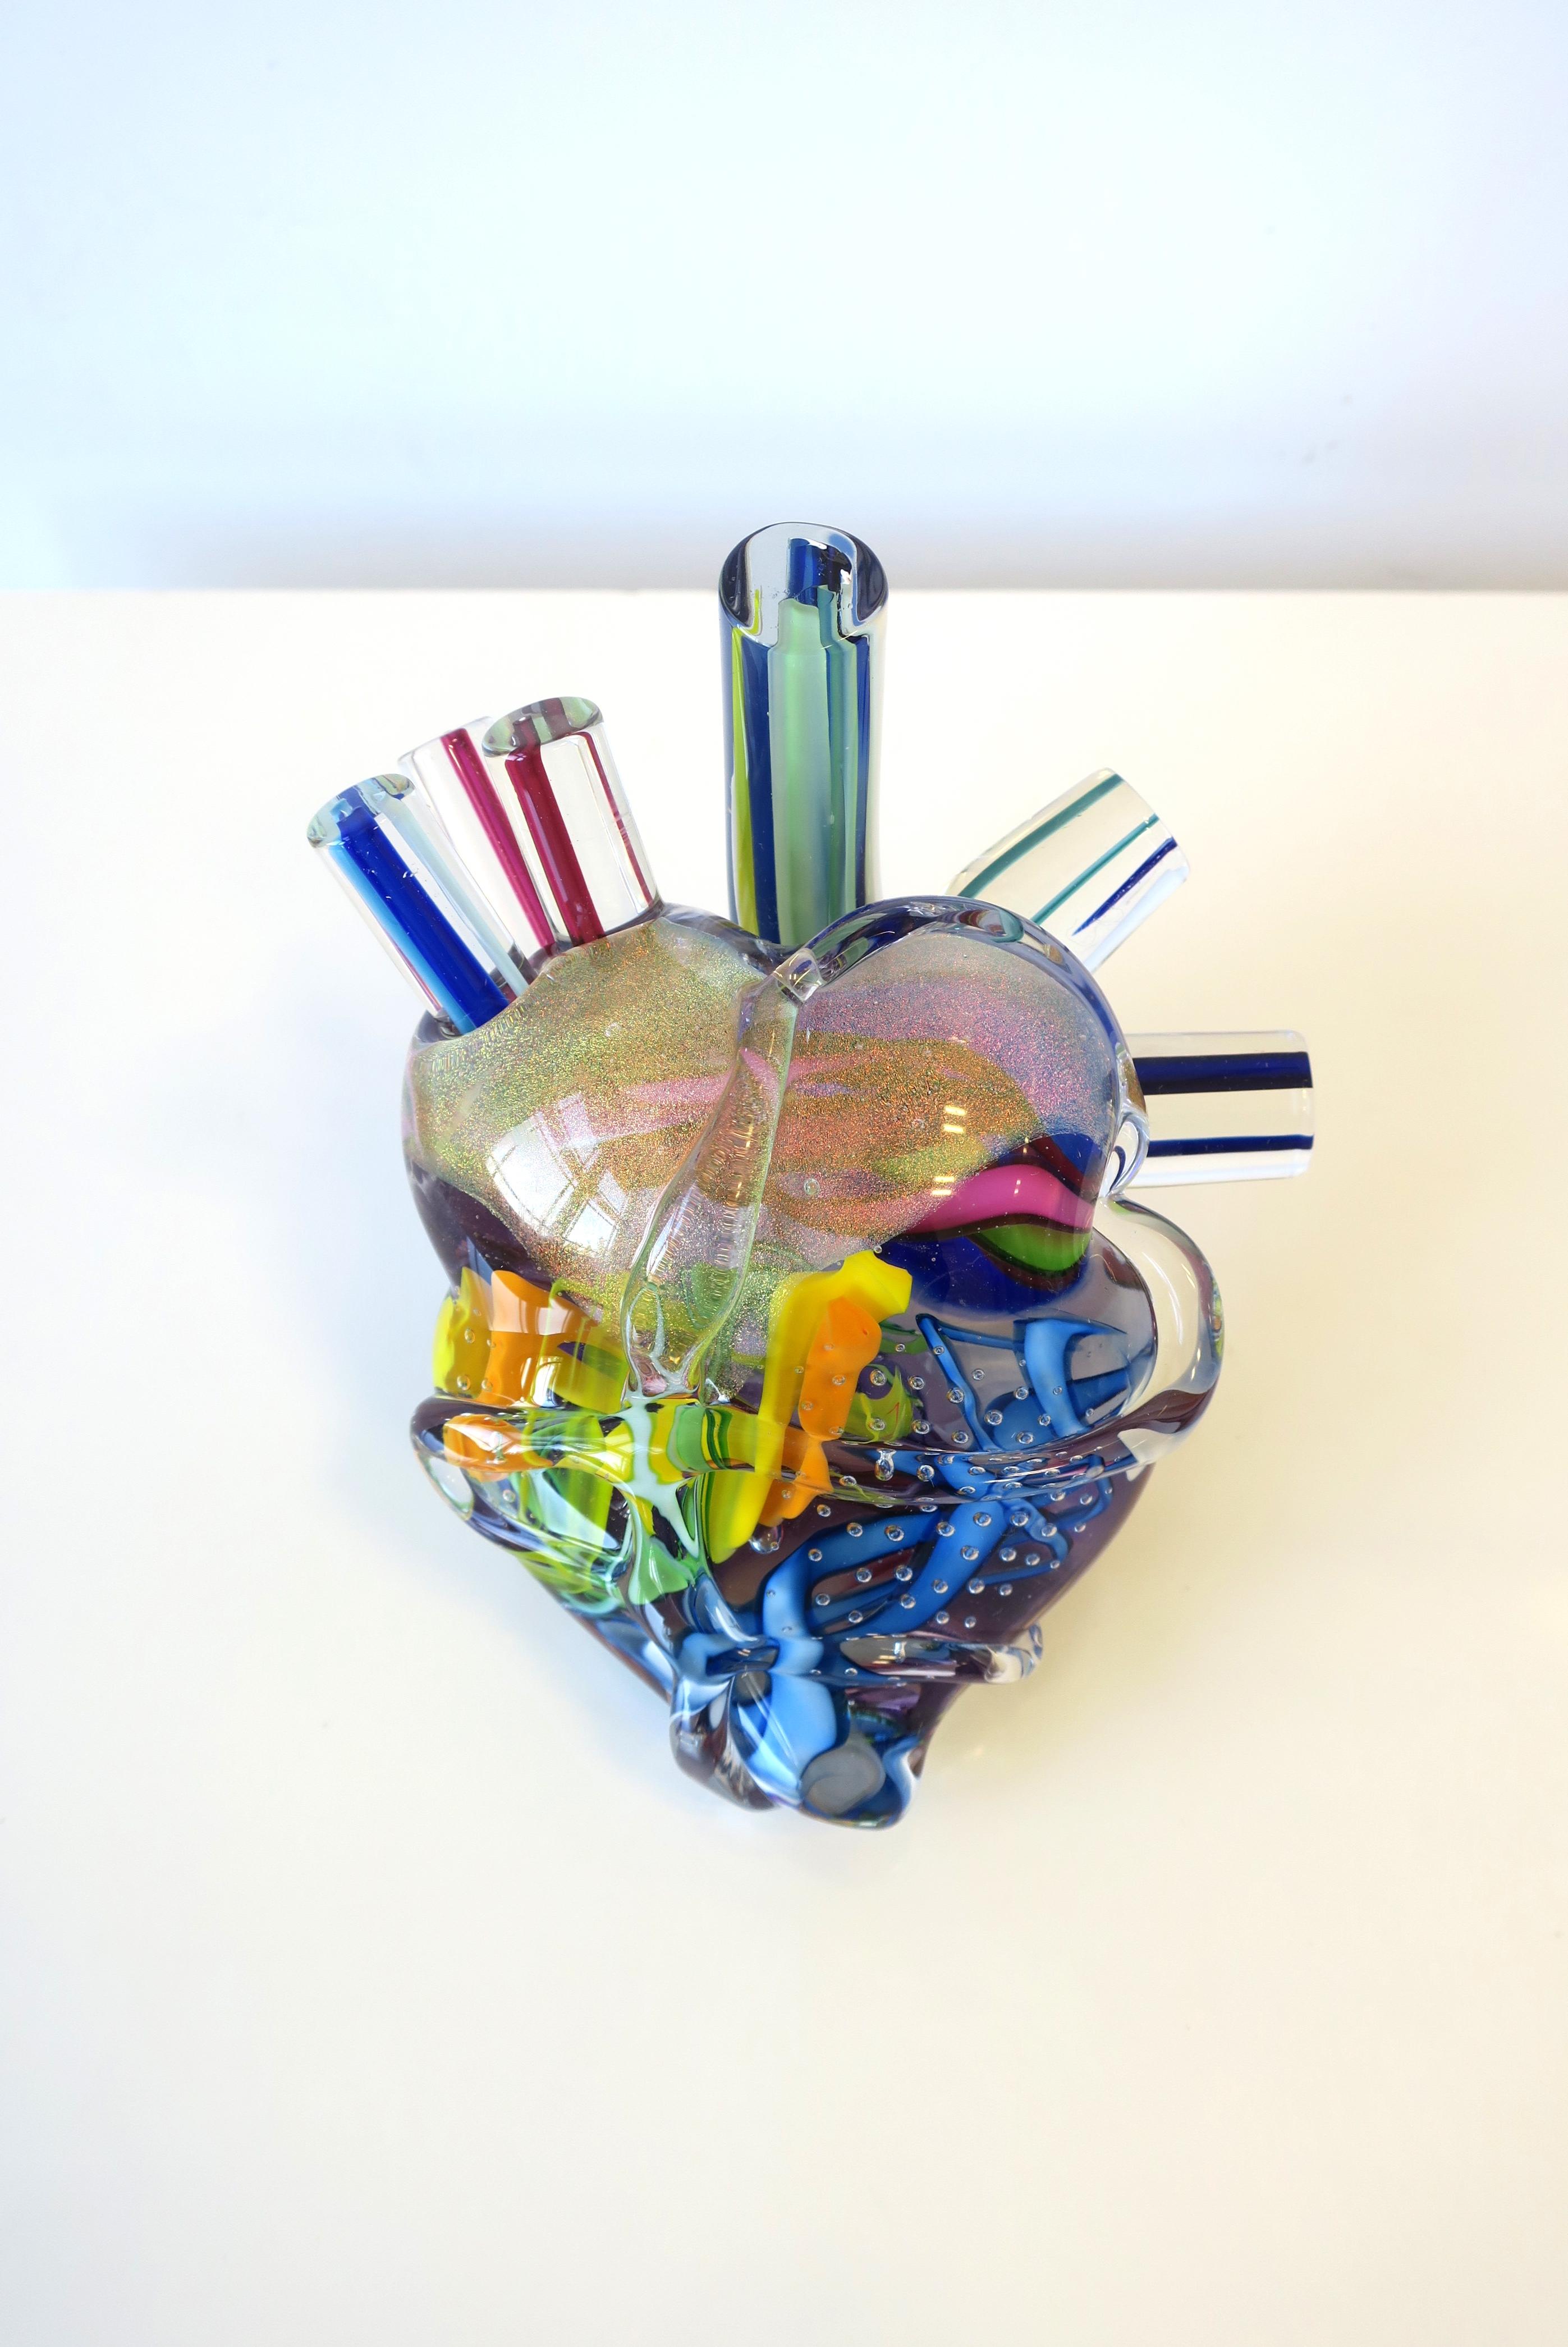 A very beautiful and substantial 'Heart of Glass' art glass sculpture depicting a human heart signed by artist (unknown), circa 21st century. Shimmering, transparent and brightly colored art glass make up this 'human heart' contemporary art, art